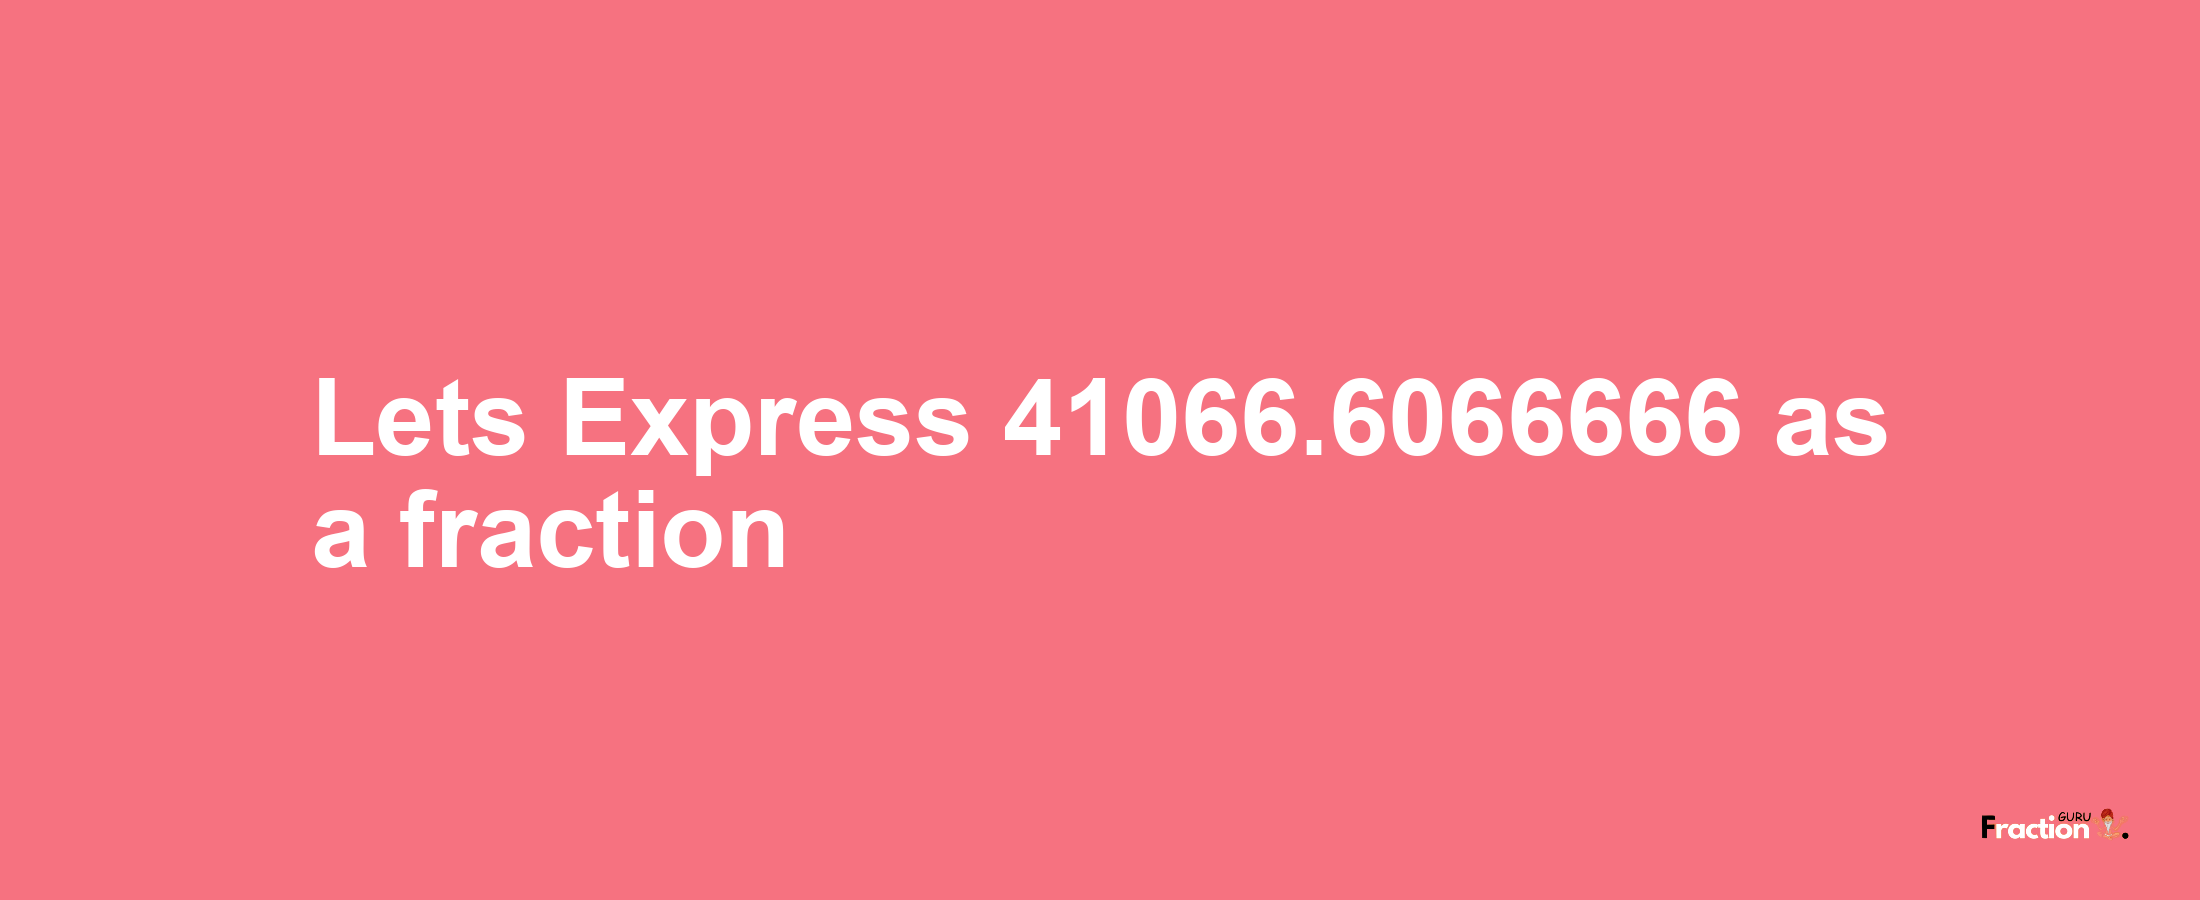 Lets Express 41066.6066666 as afraction